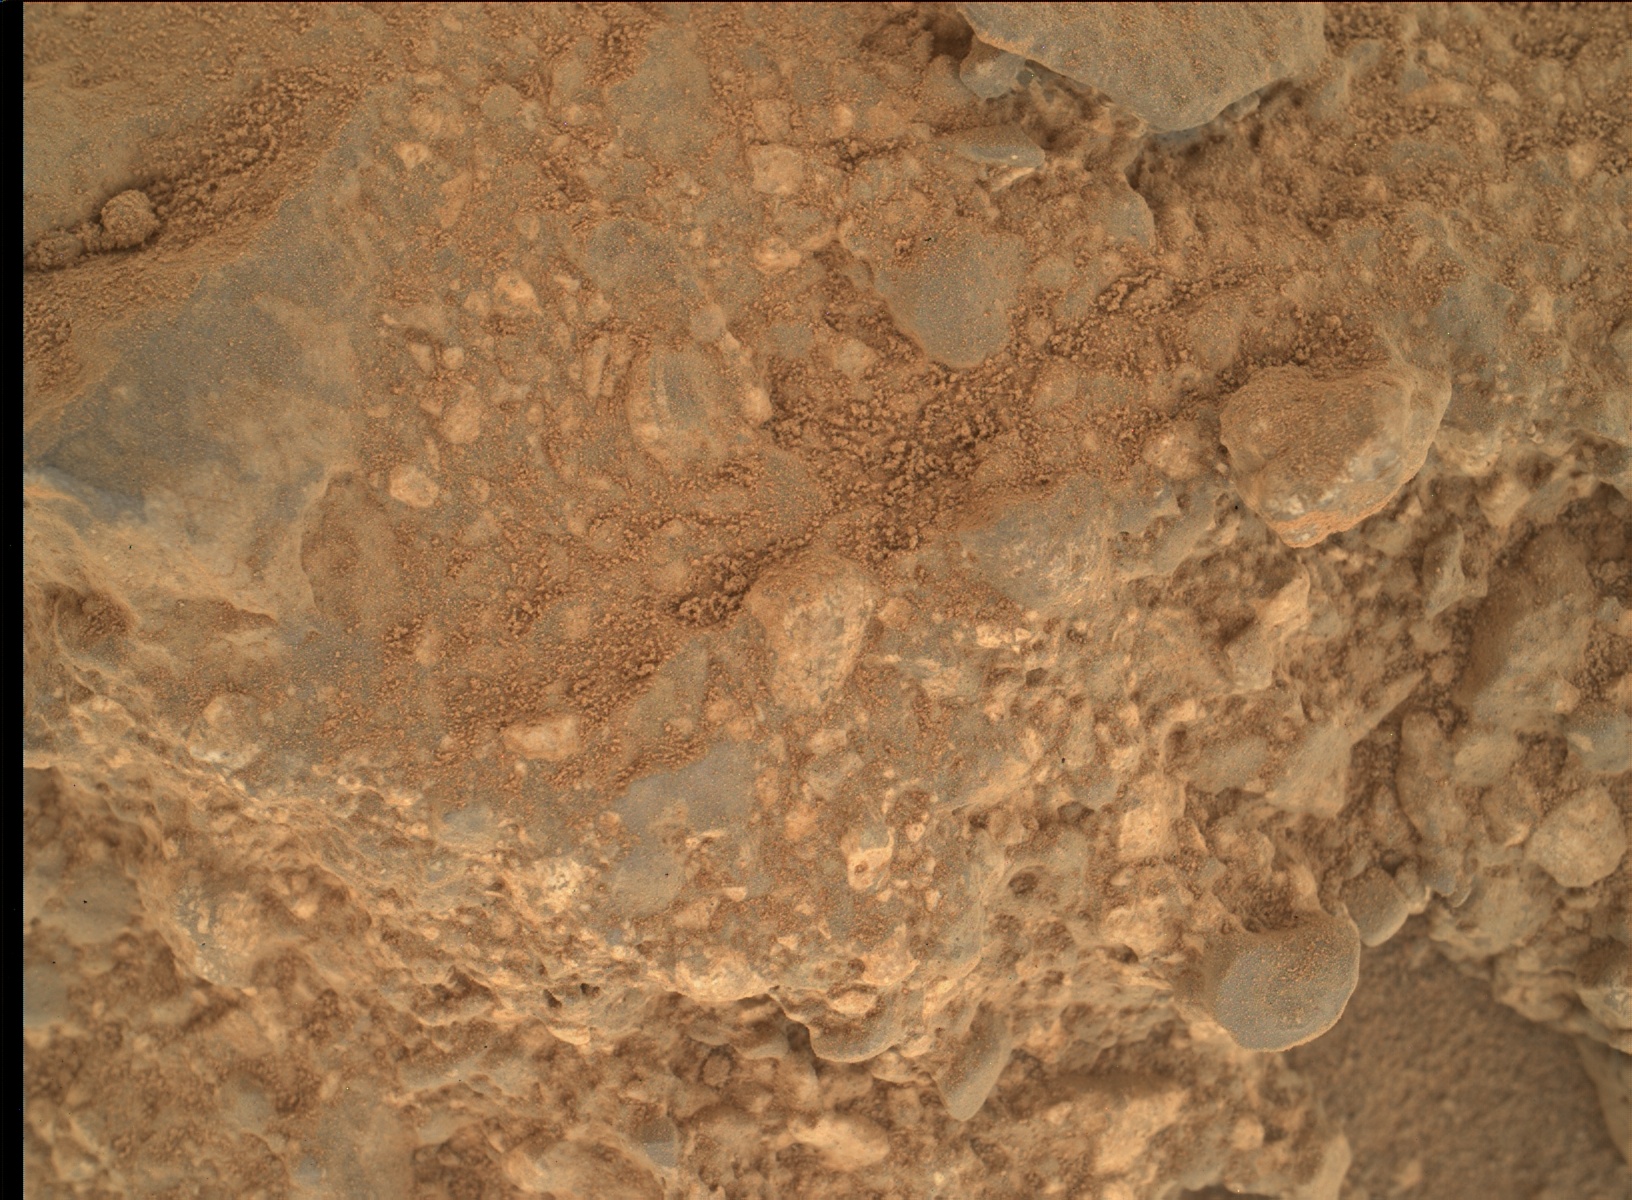 Nasa's Mars rover Curiosity acquired this image using its Mars Hand Lens Imager (MAHLI) on Sol 649